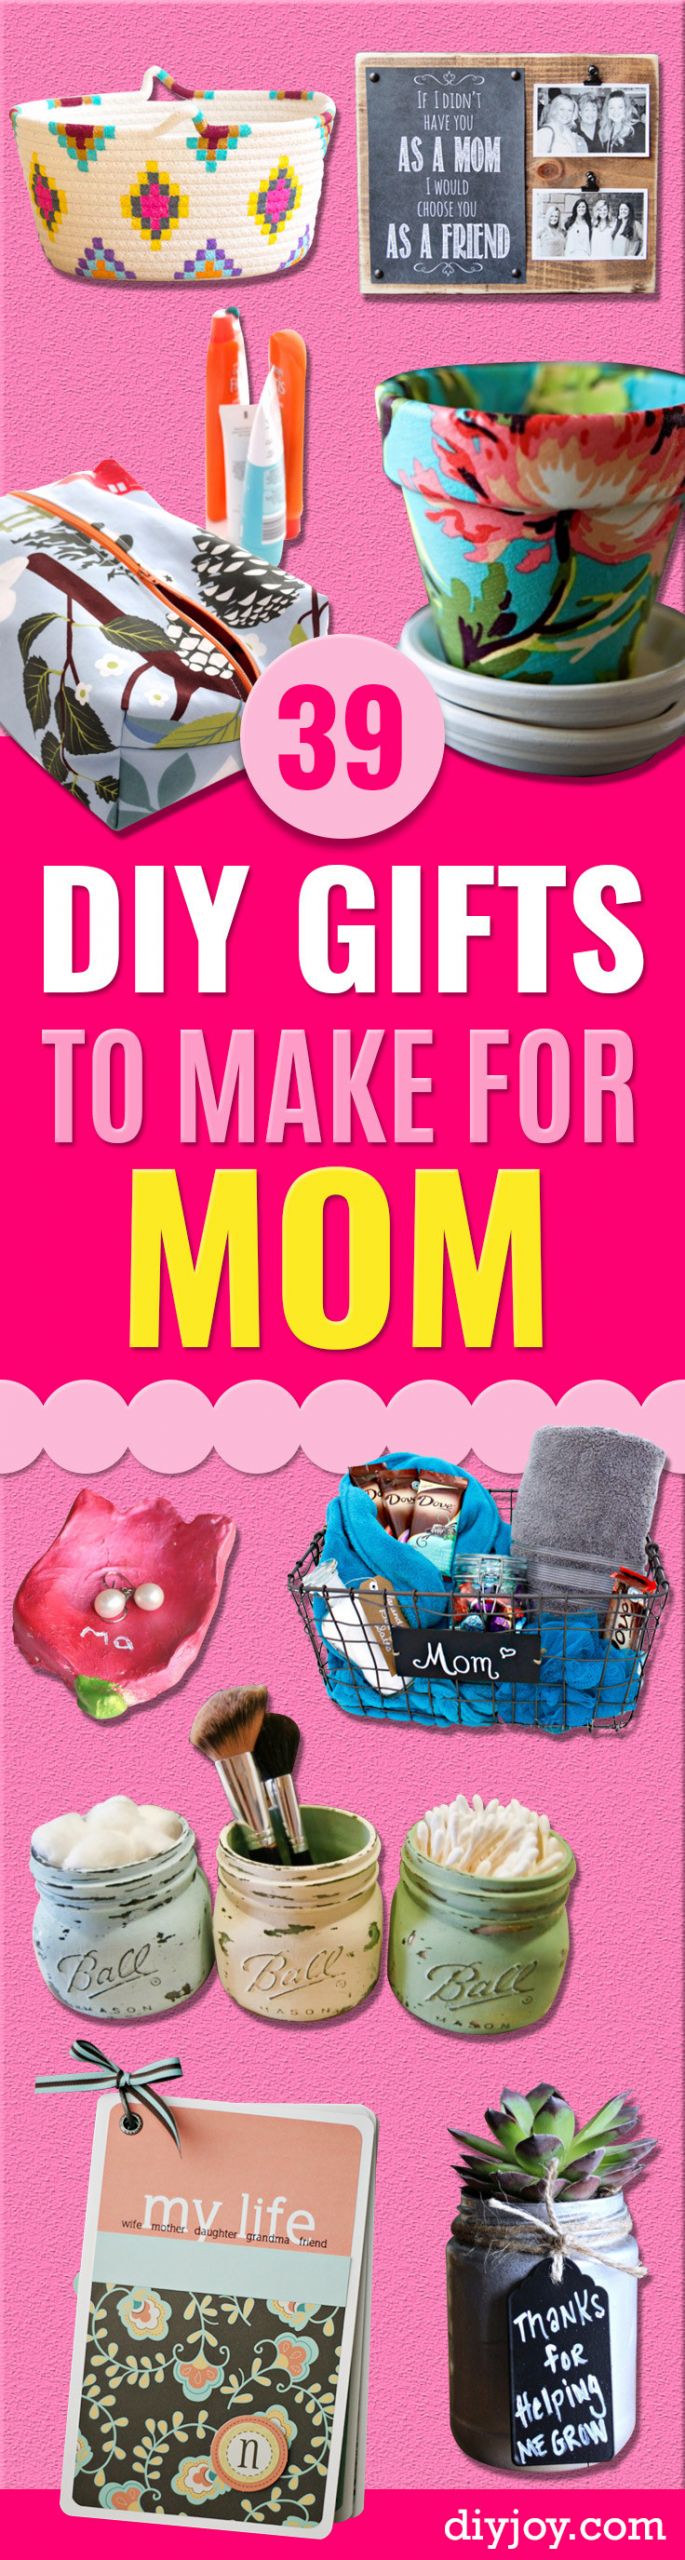 Creative Birthday Gifts For Mom
 39 Creative DIY Gifts to Make for Mom